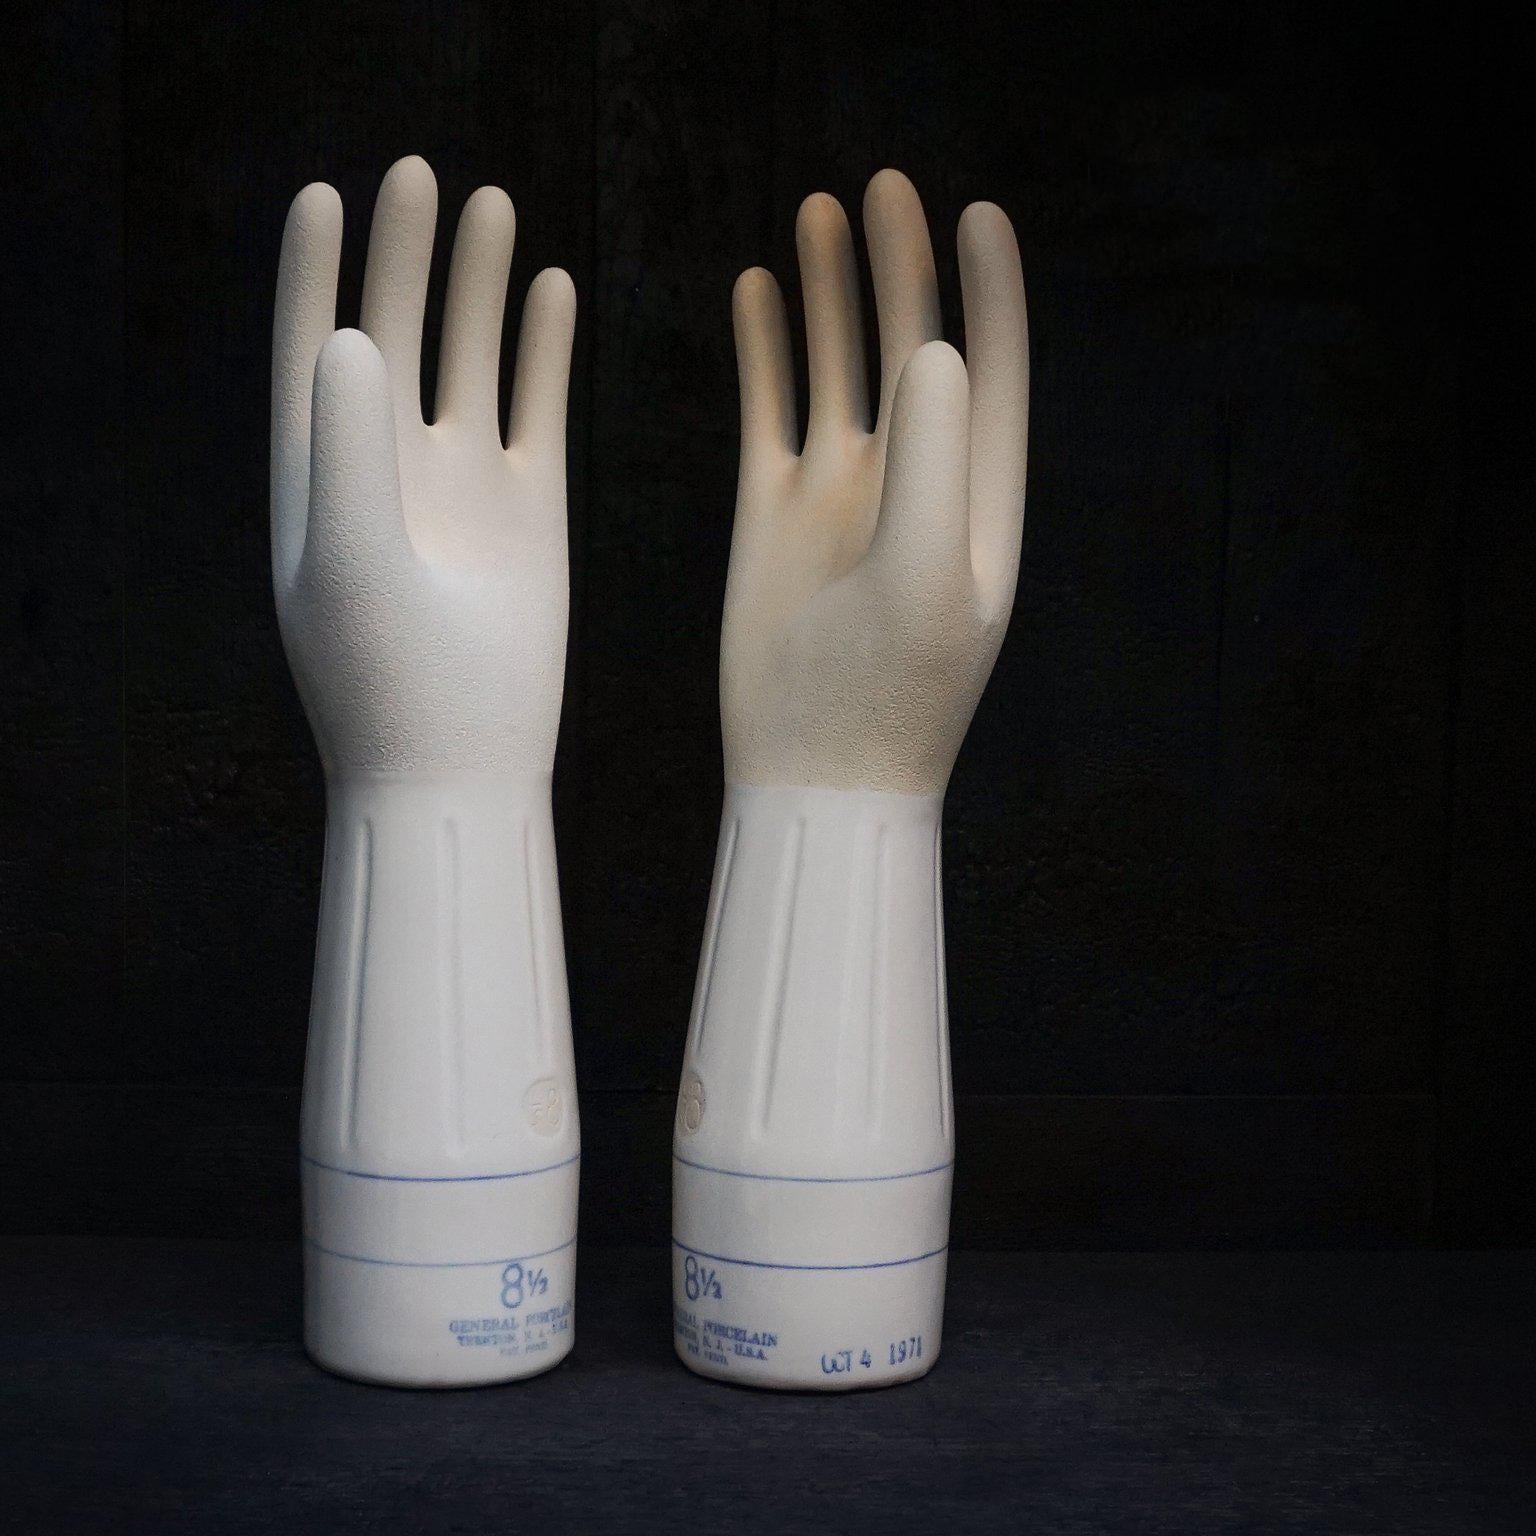 Very unique and exceptionally cool vintage set of left and right Industrial porcelain factory glove forms or moulds in size 8 1/2. 

Visible maker markings, glove sizes and production dates at the bottom rim in blue. The left hand was made on